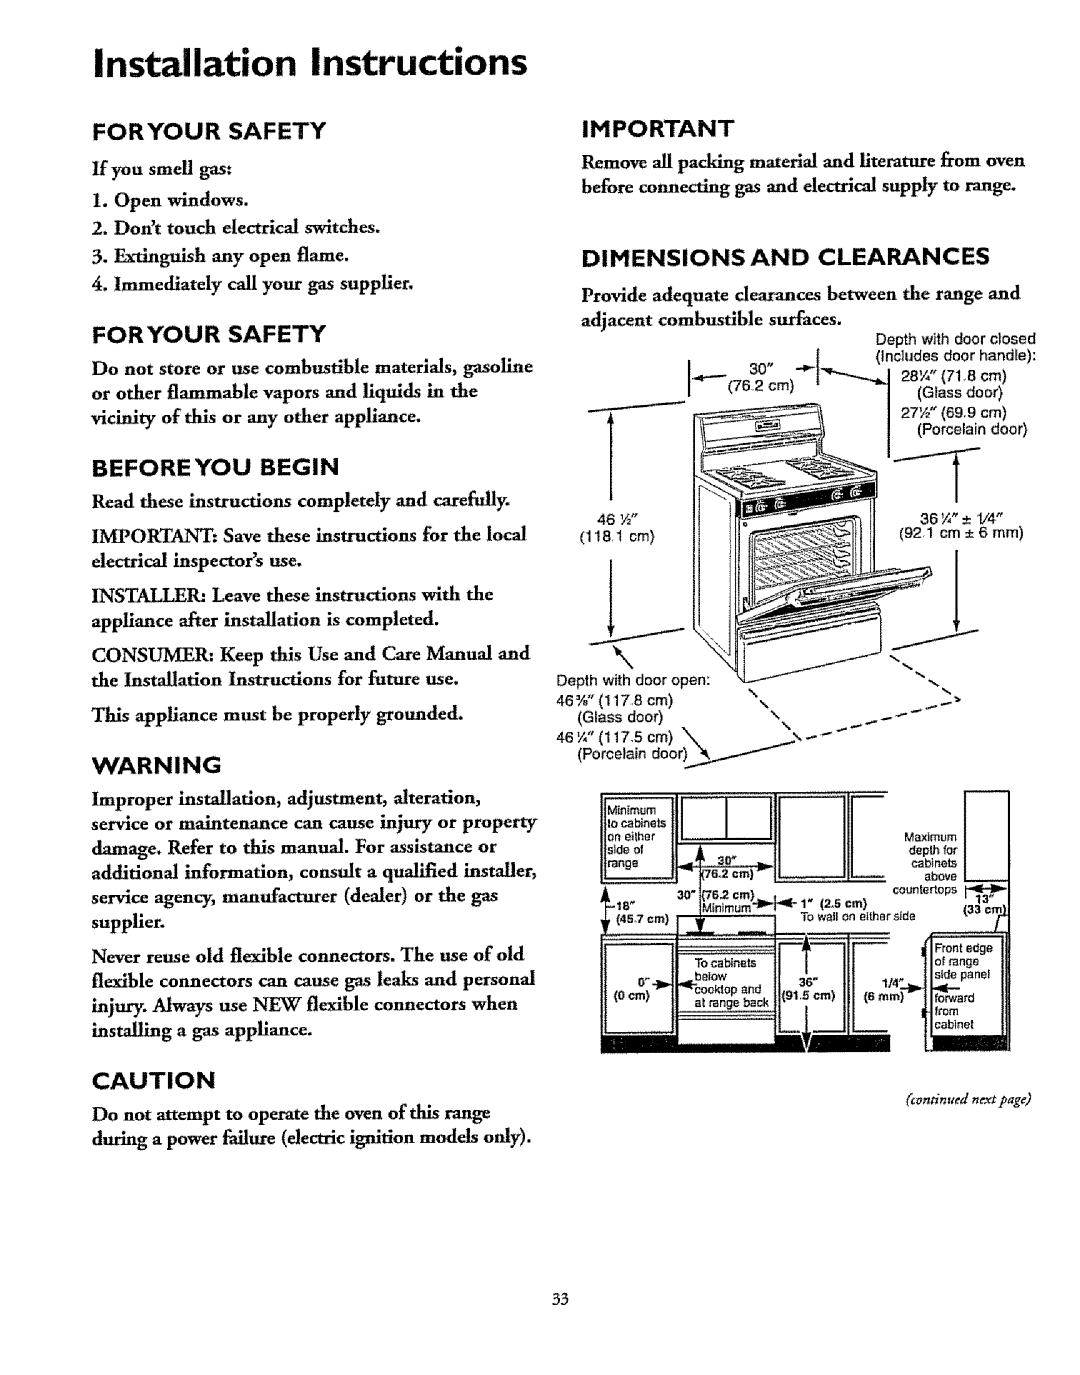 Sears 72678, 72671, 72675, 75471 Installation Instructions, Foryour Safety, _t_----.-28_zt.8cm, Dimensions And Clearances 